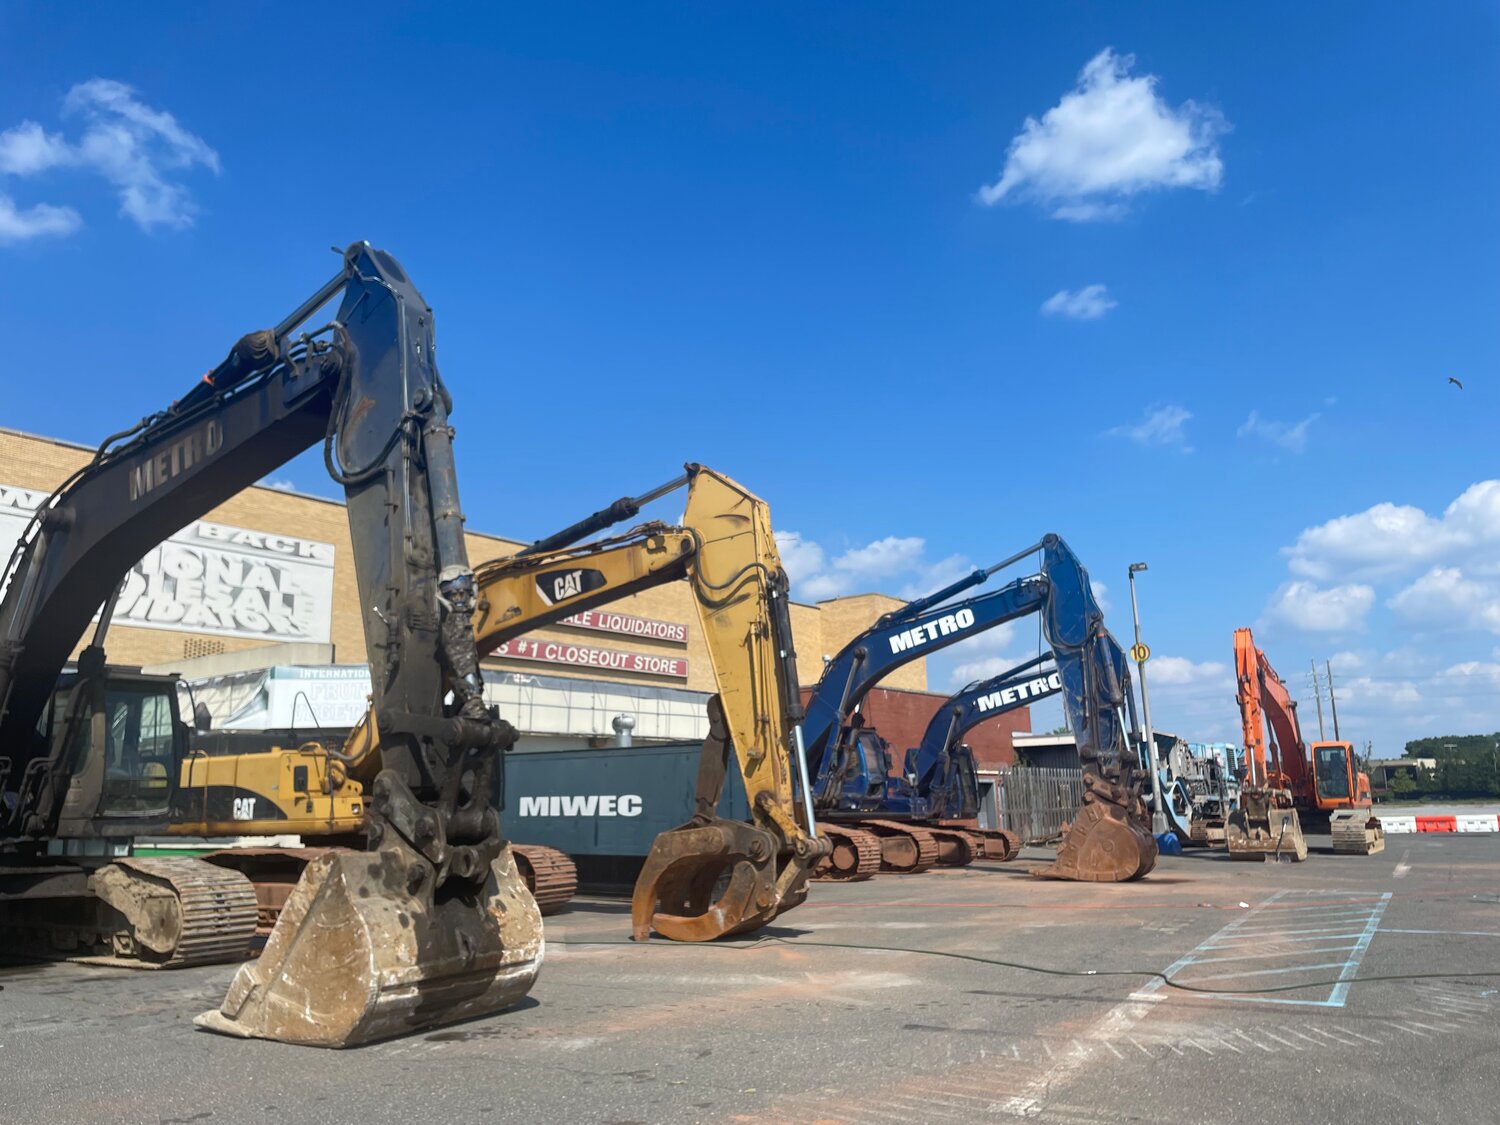 Excavators lined up in front of National Wholesale Liquidators, which has been abandoned for years.